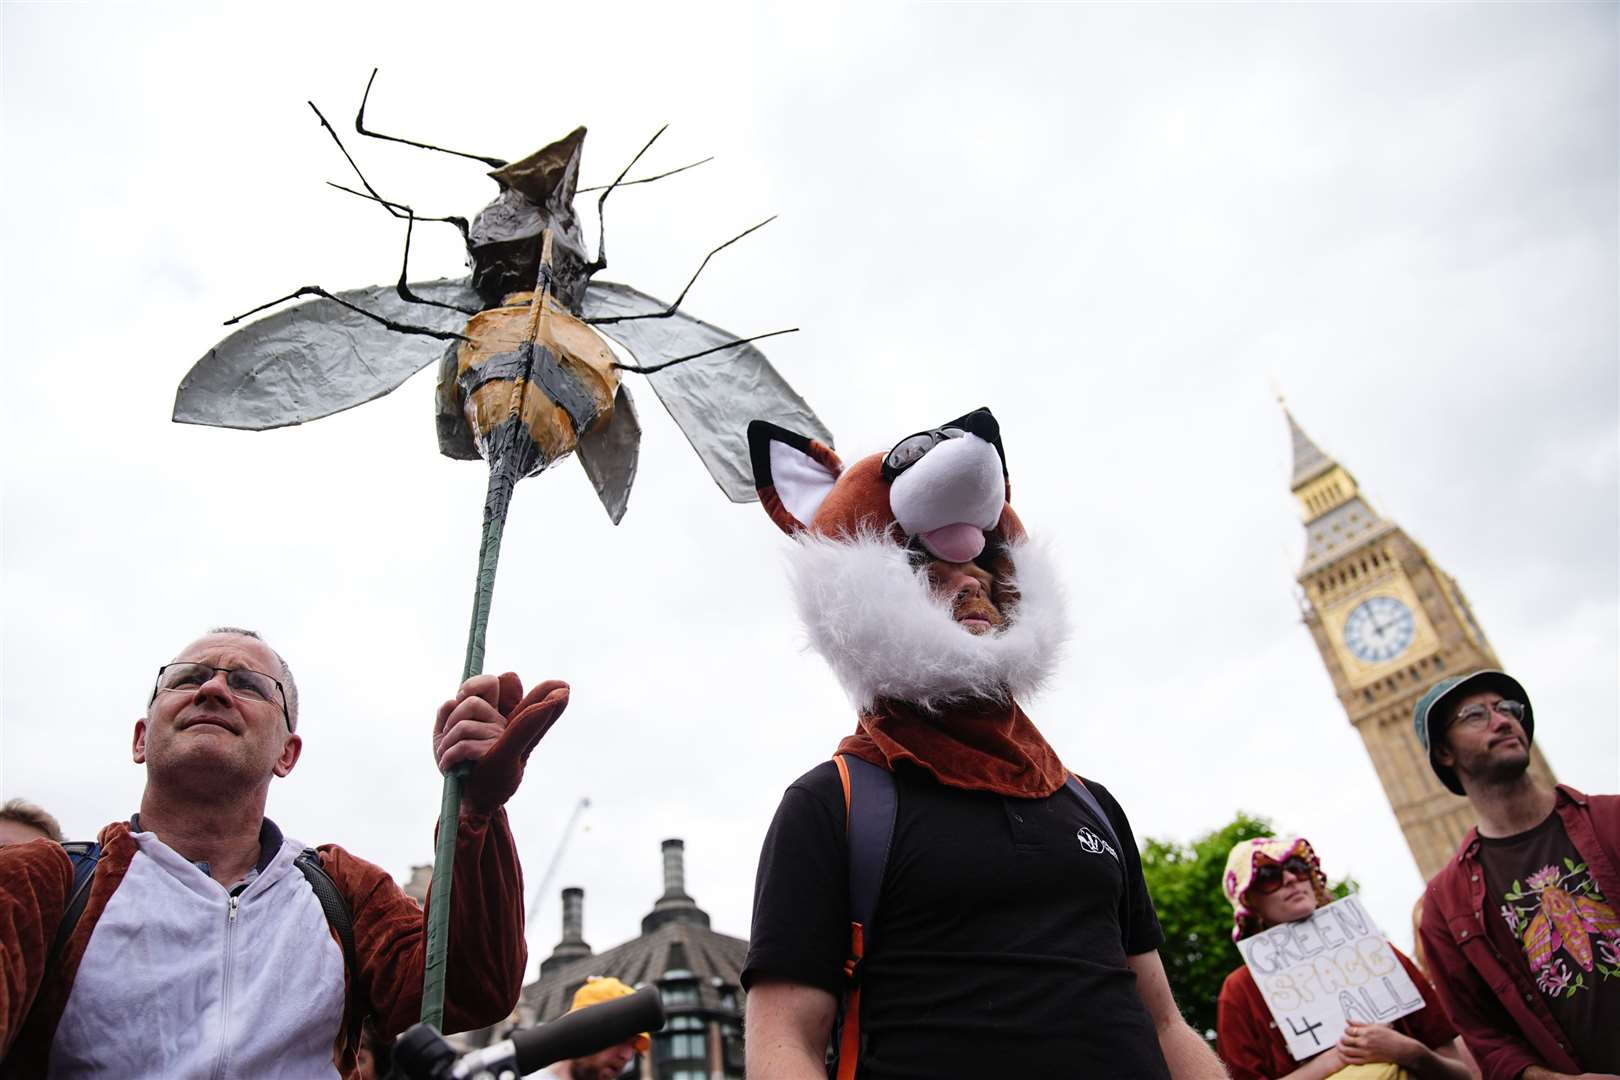 Colourful costumes and banners were out in force during the demo, which urged politicians to protect the environment (Aaron Chown/PA)